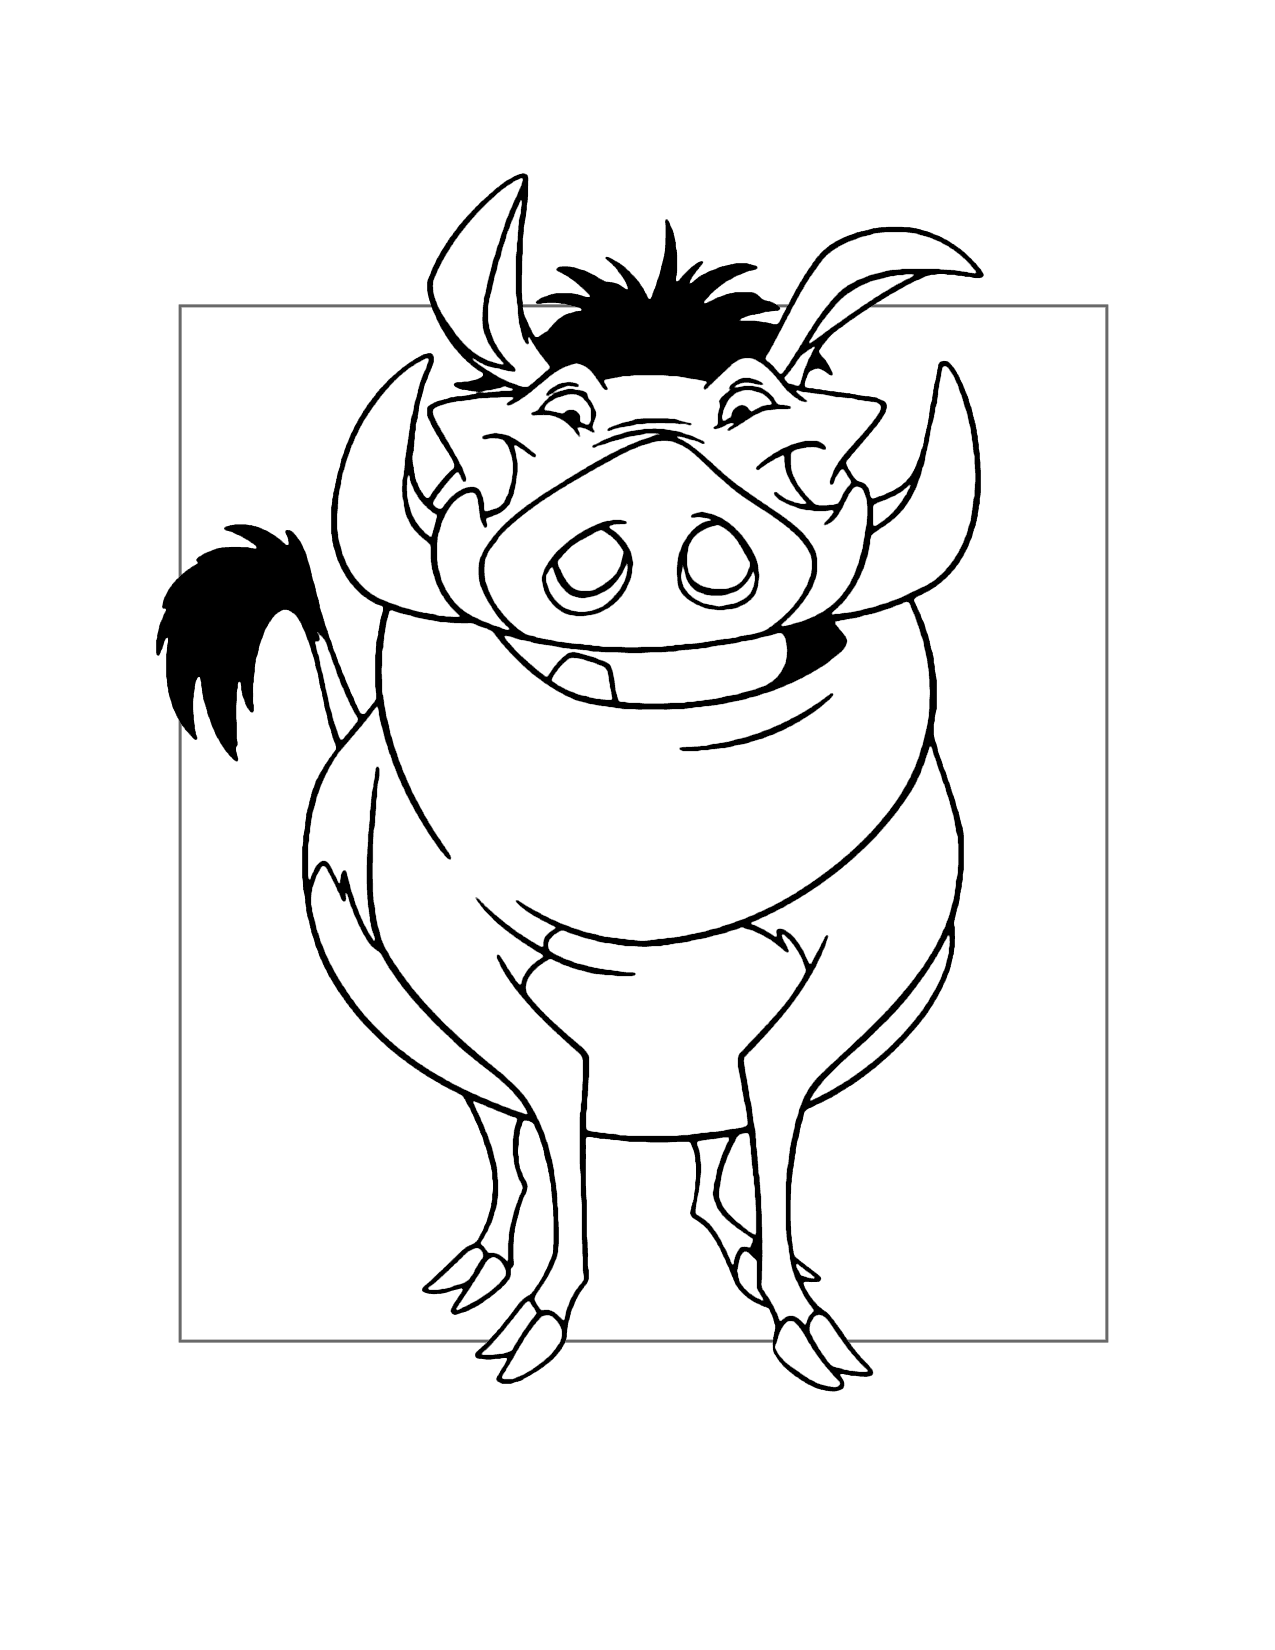 Funny Pumba Coloring Page